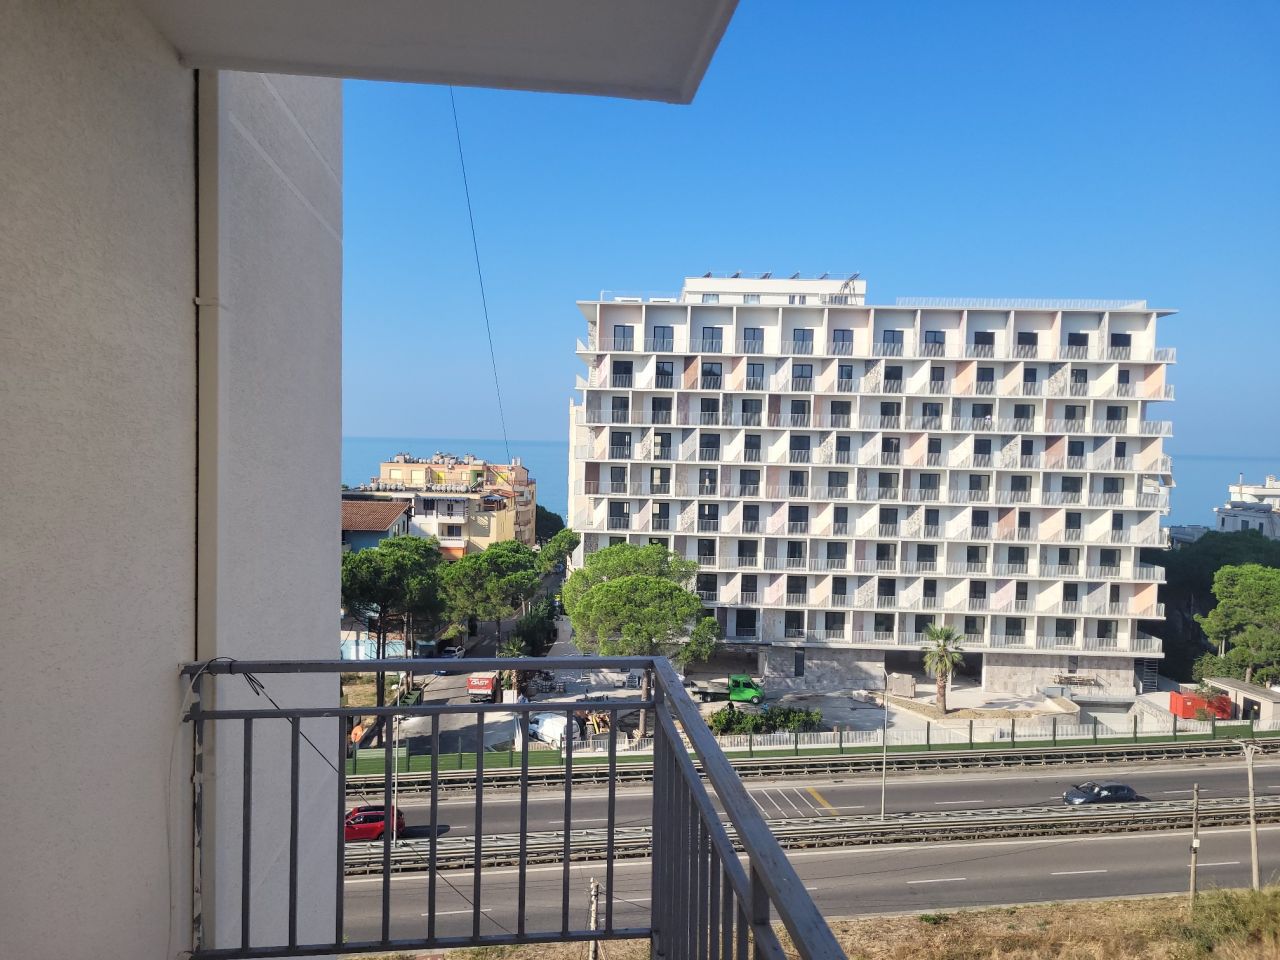 Apartment For Sale In Durres Albania, Located In A Quiet Area, Close To The Beach